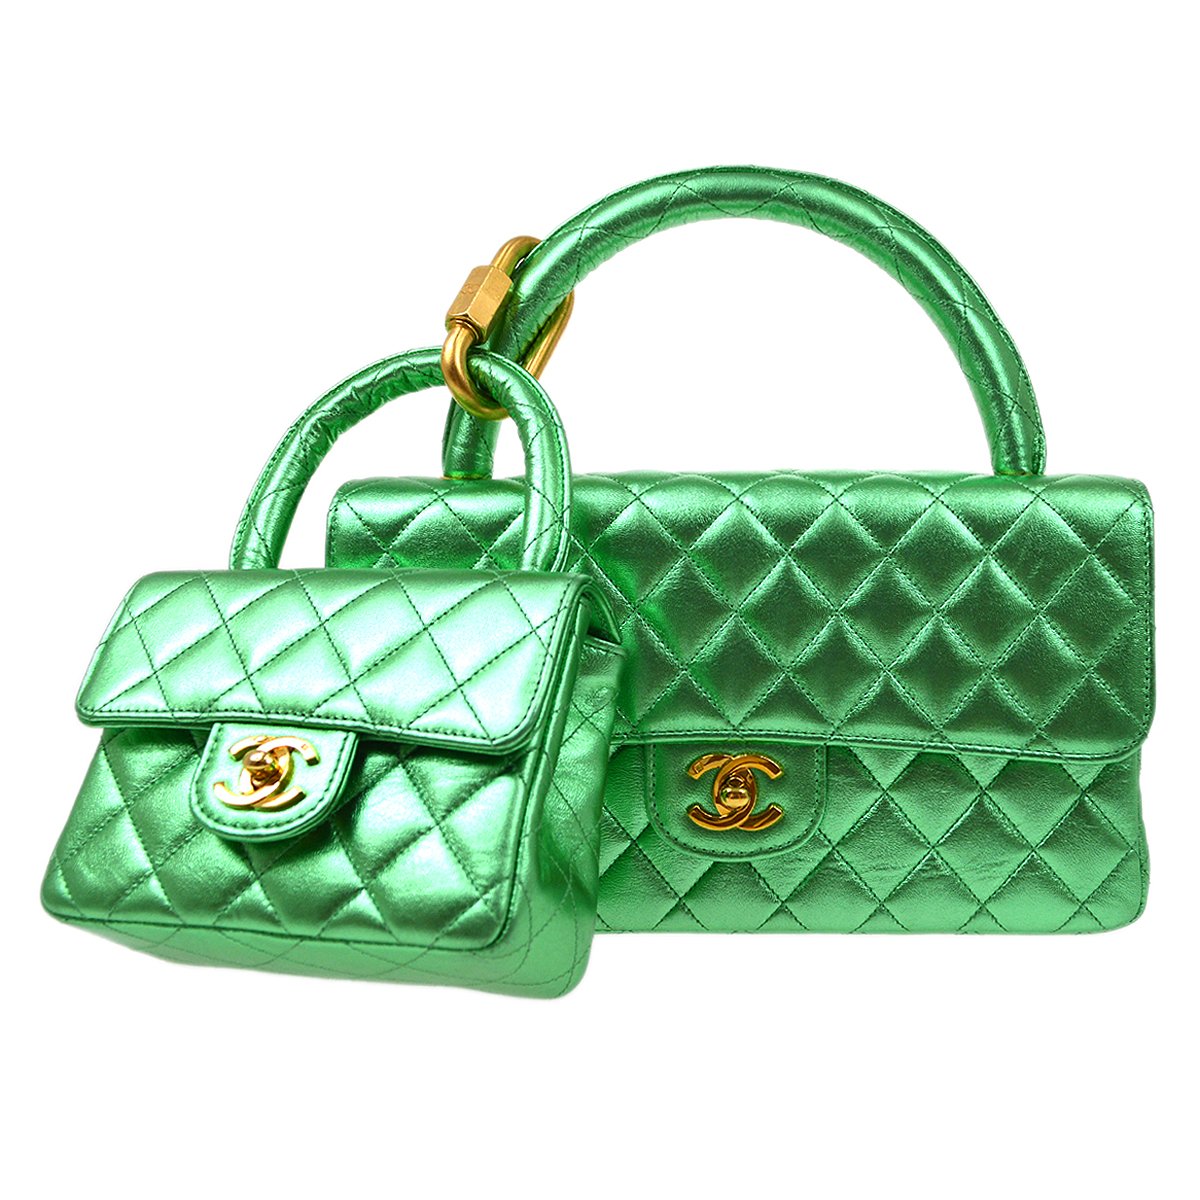 Forget About Hermes And Chanel Take Note Of Goyard and Delvaux